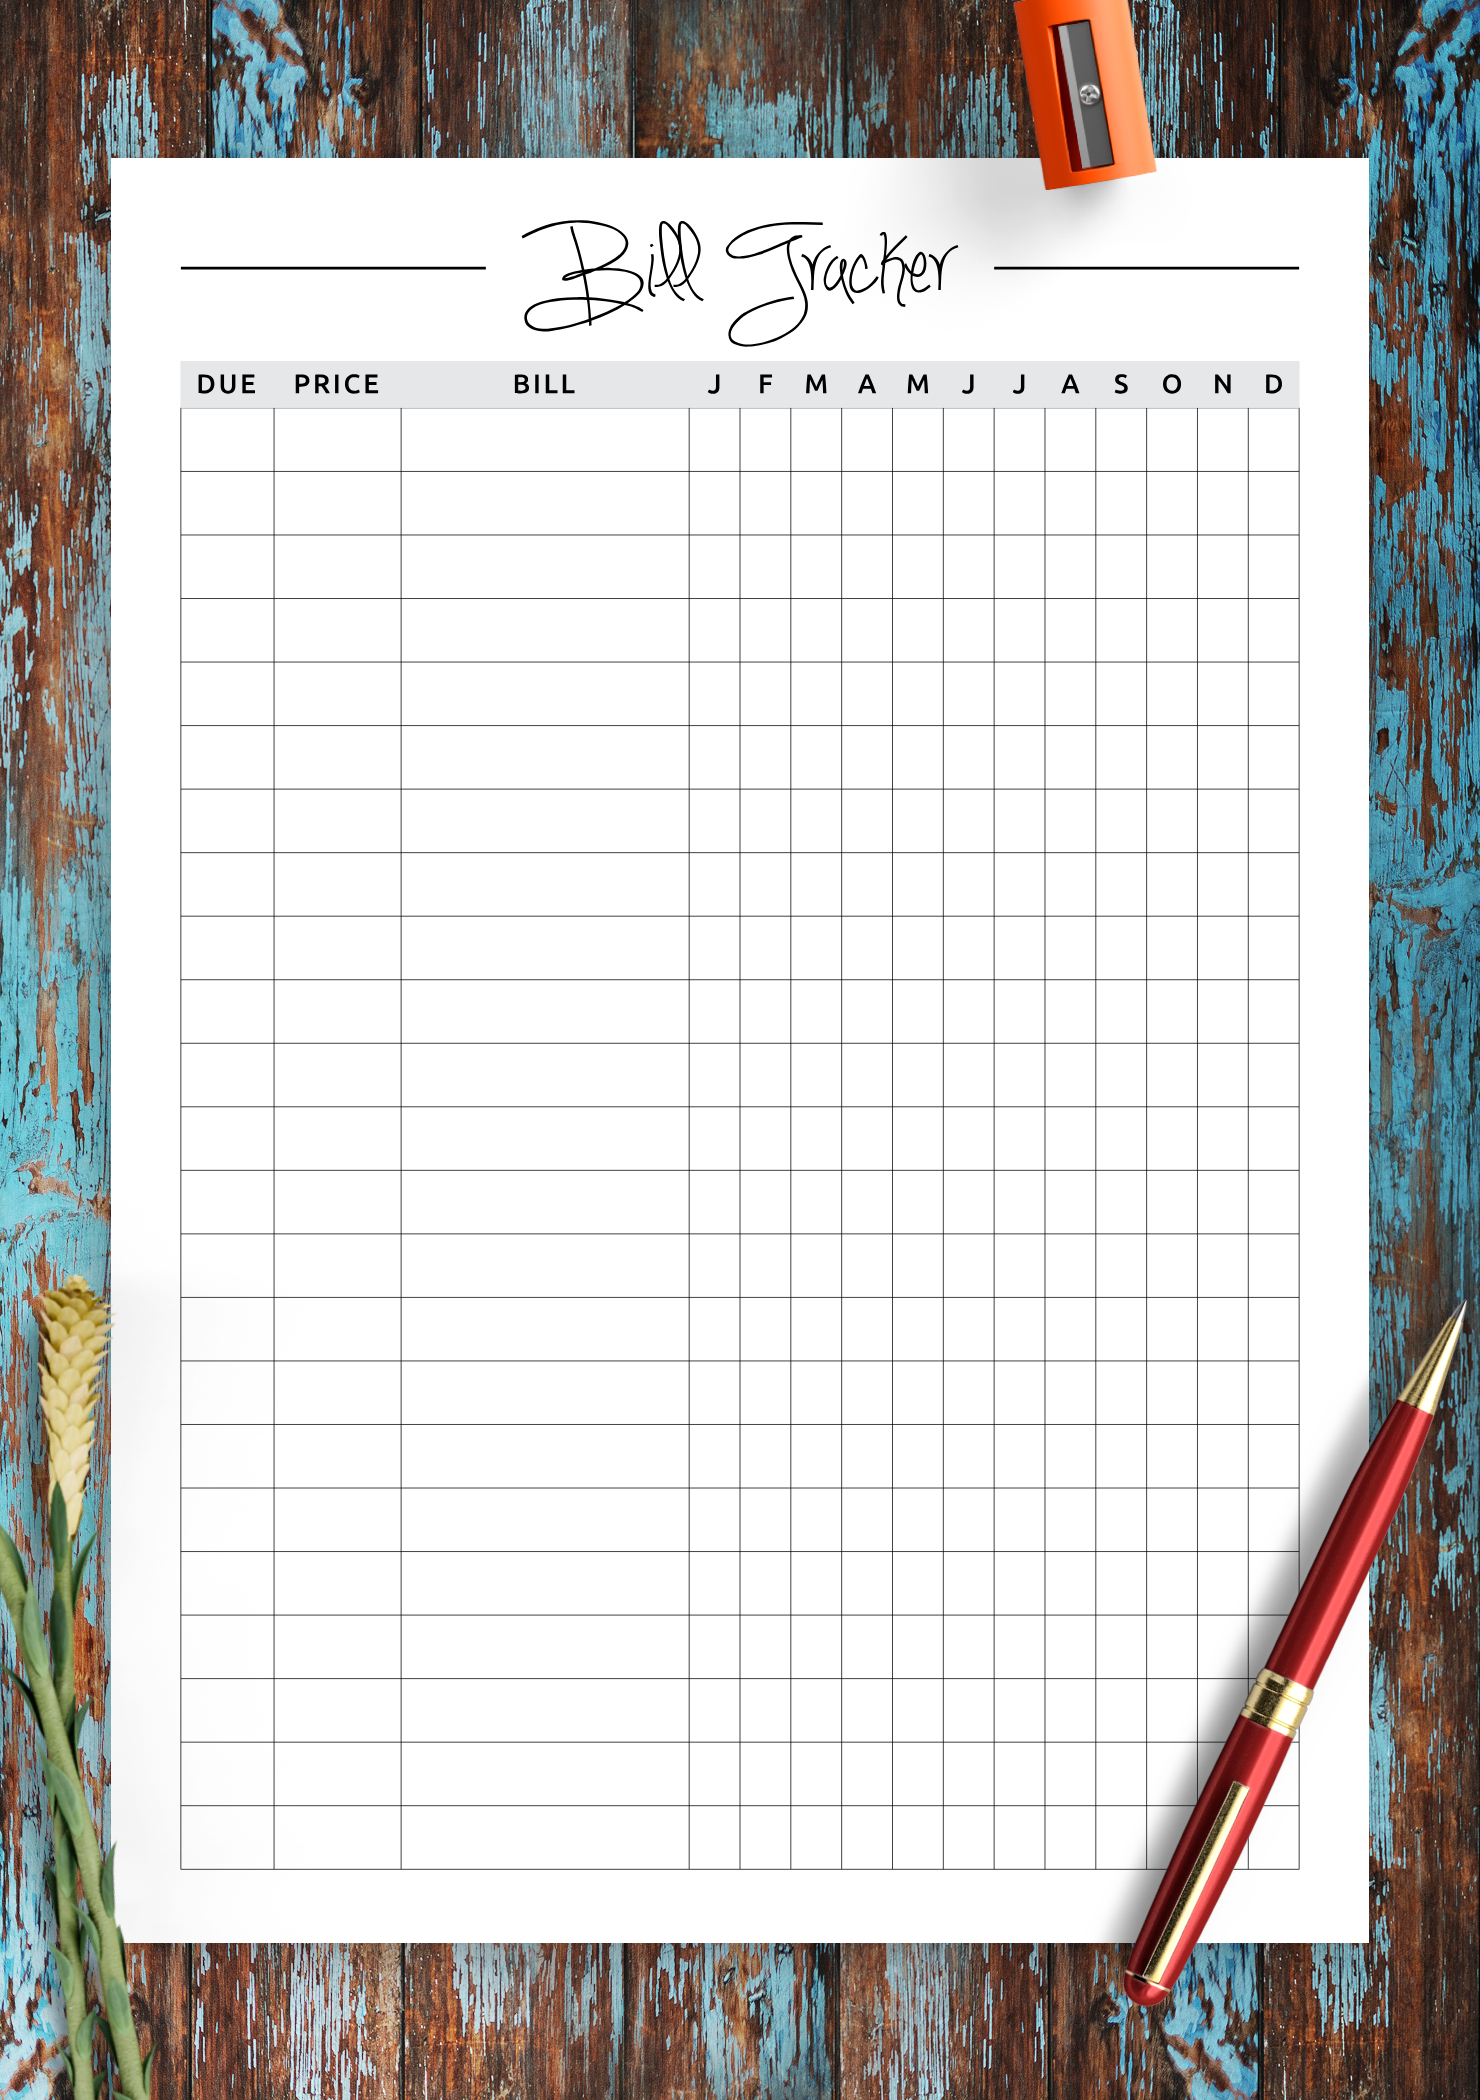 Download Printable Square Grid Monthly Bill Tracker Pdf intended for Free Printable Monthly Bill Calendar